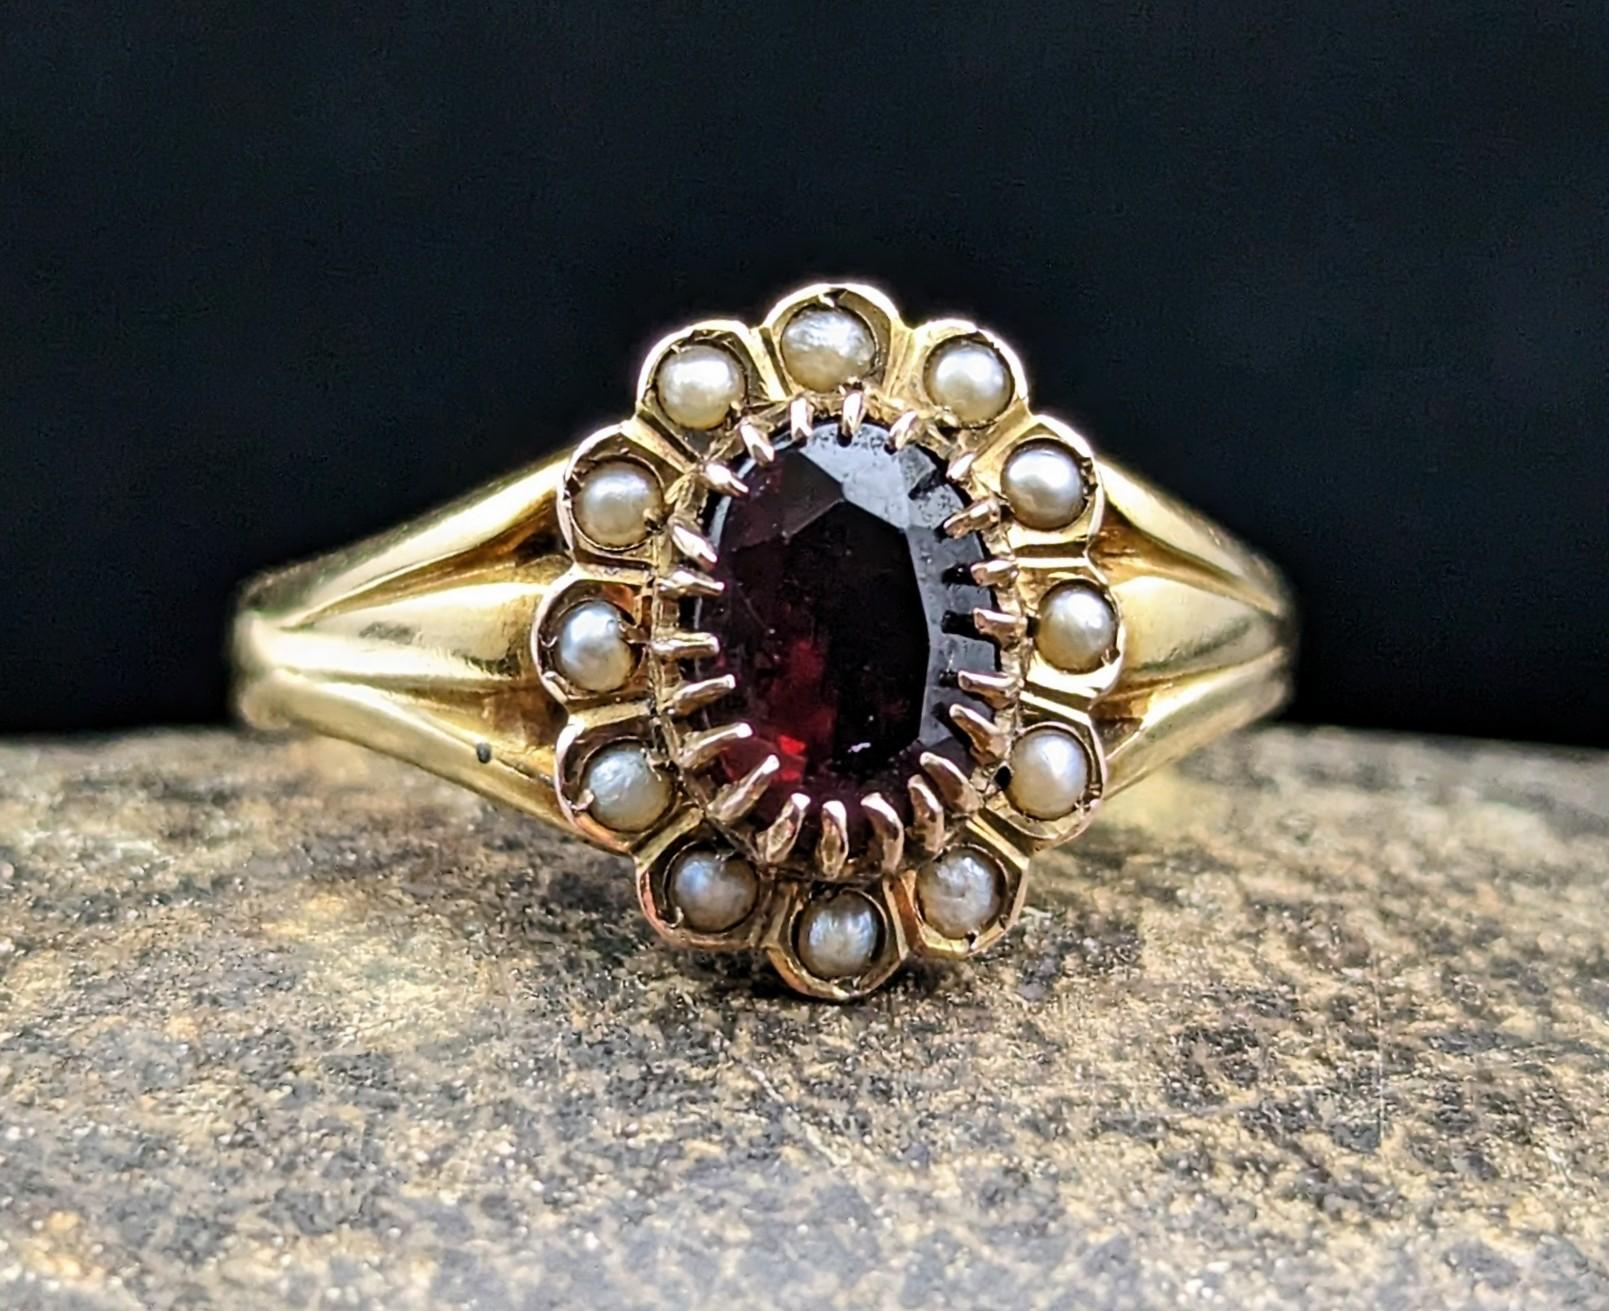 Oval Cut Antique Garnet and Pearl Cluster Ring, 18k Yellow Gold, Edwardian